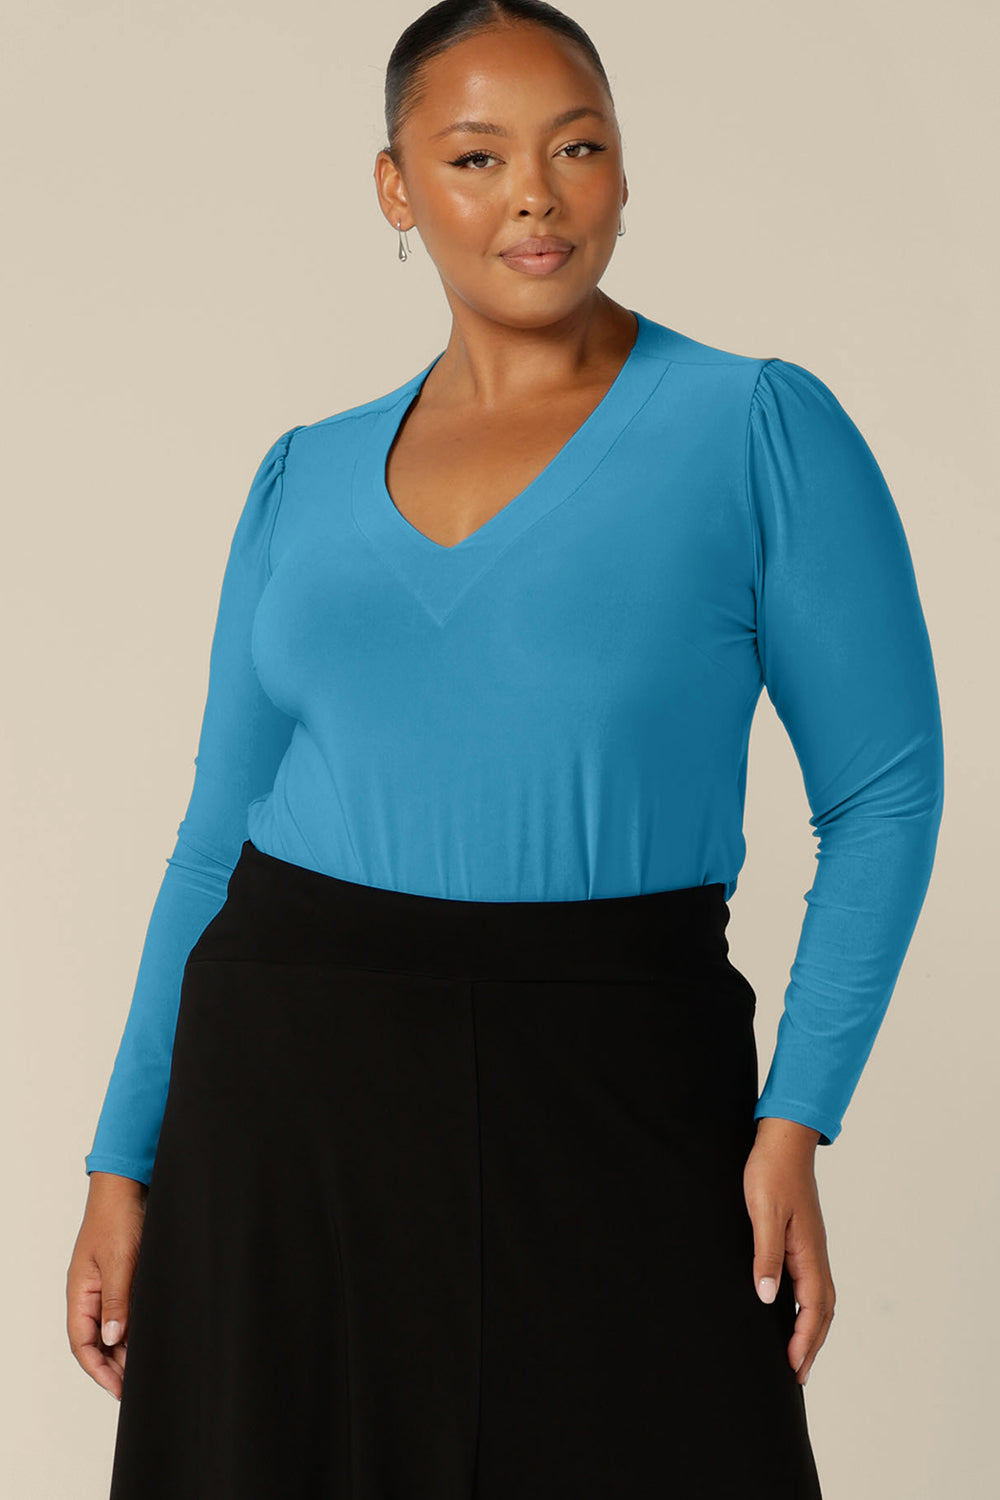 A plus size, size 18 woman wears a long sleeve, V-neck top in Opal blue jersey. Made in Australia by Australian and New Zealand women's clothing company, L&F, this top is available for shipping in sizes 8 to 24.